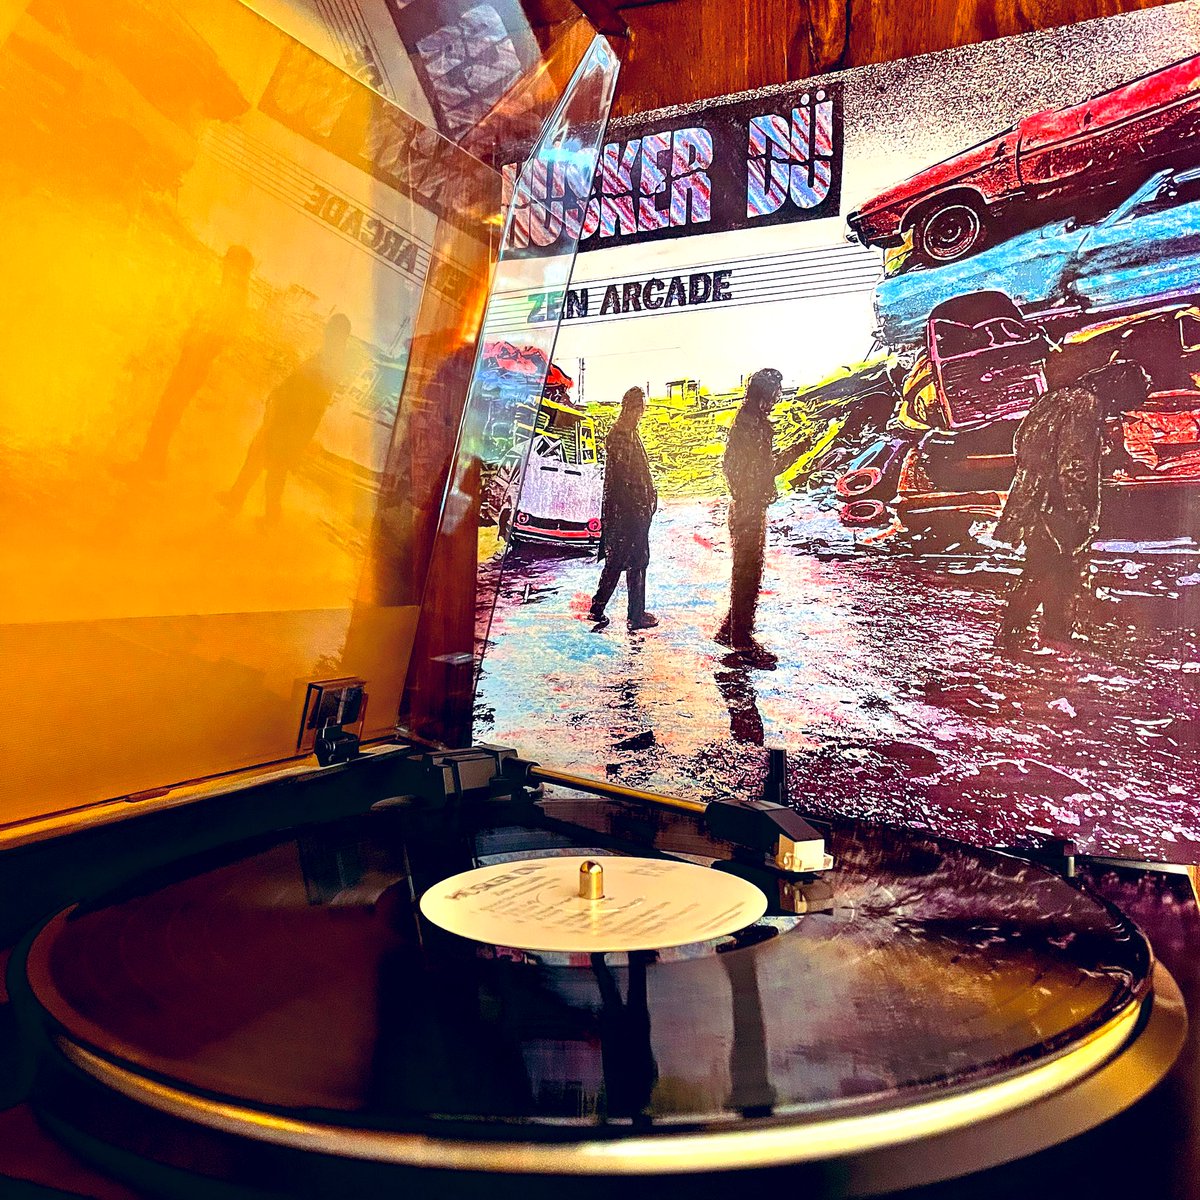 ..The waves kept on repeating
Each one crashing to the shore
And my footprints nowhere leading
As they disappeared once more..
#HüskerDü #ZenArcade #Vinyl